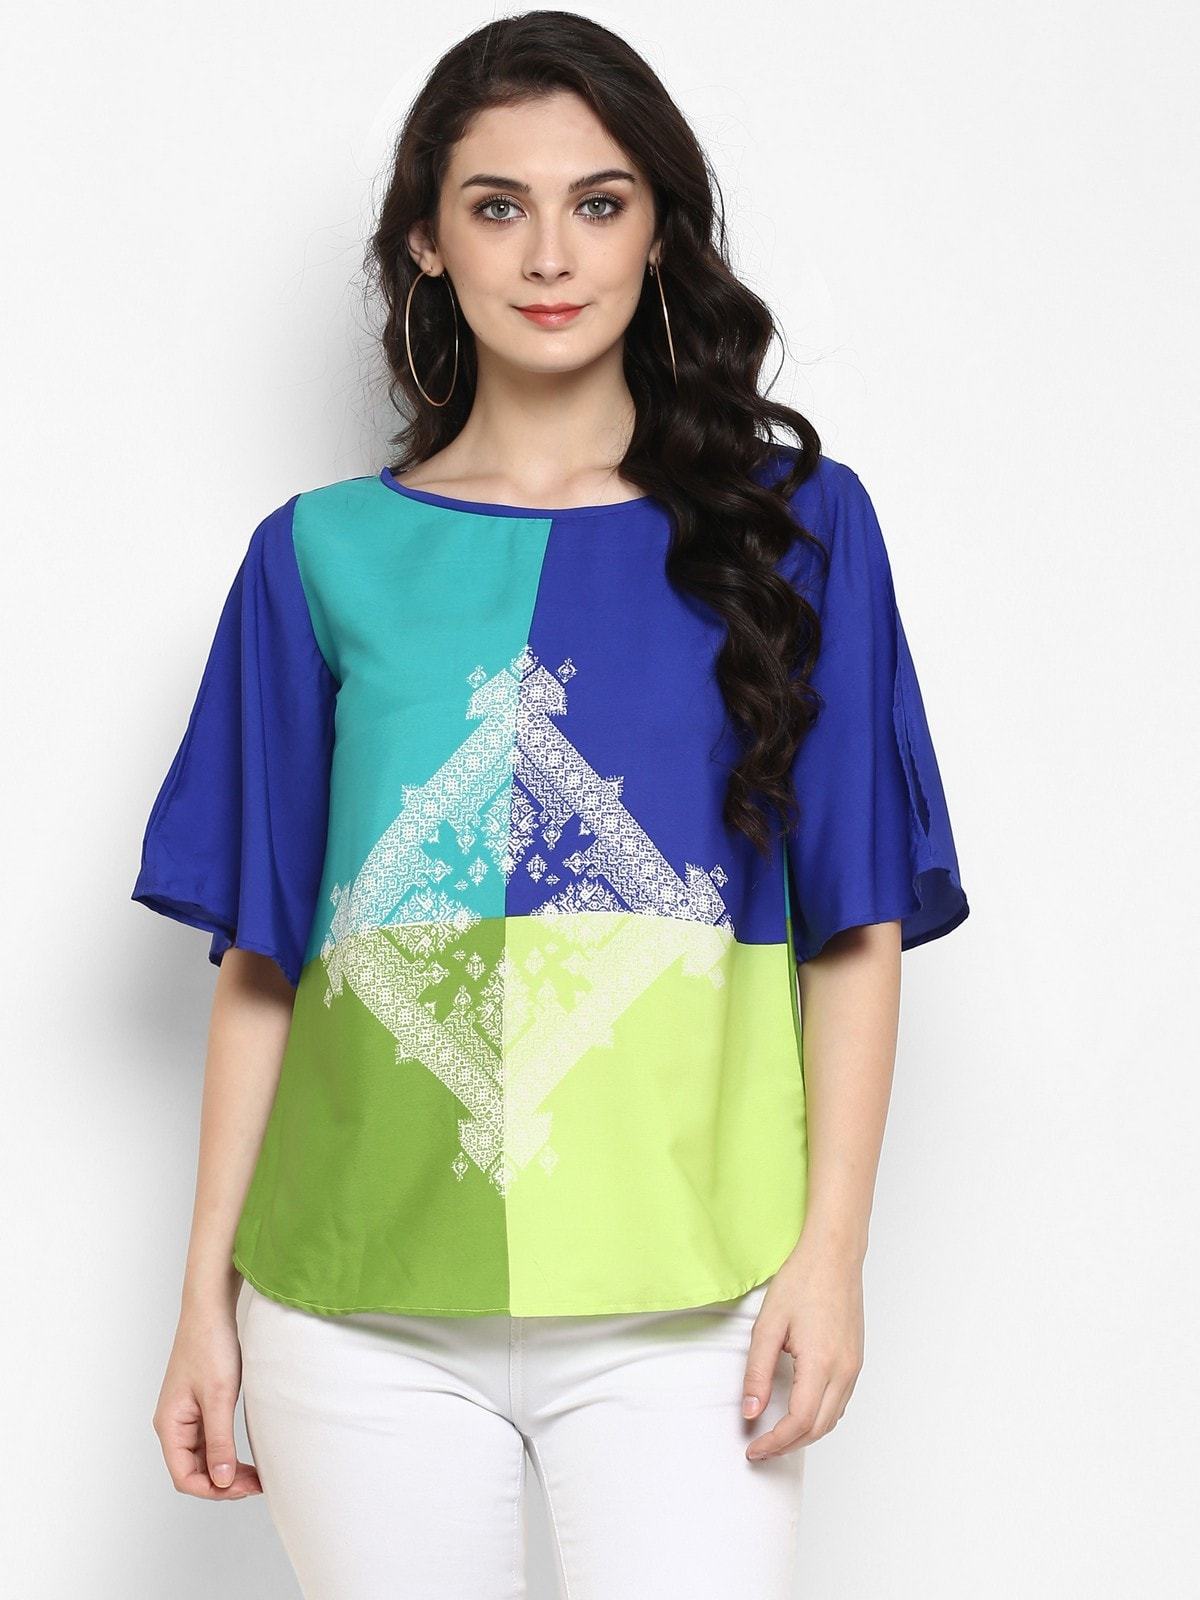 Women's Quirky Placement print Top - Pannkh